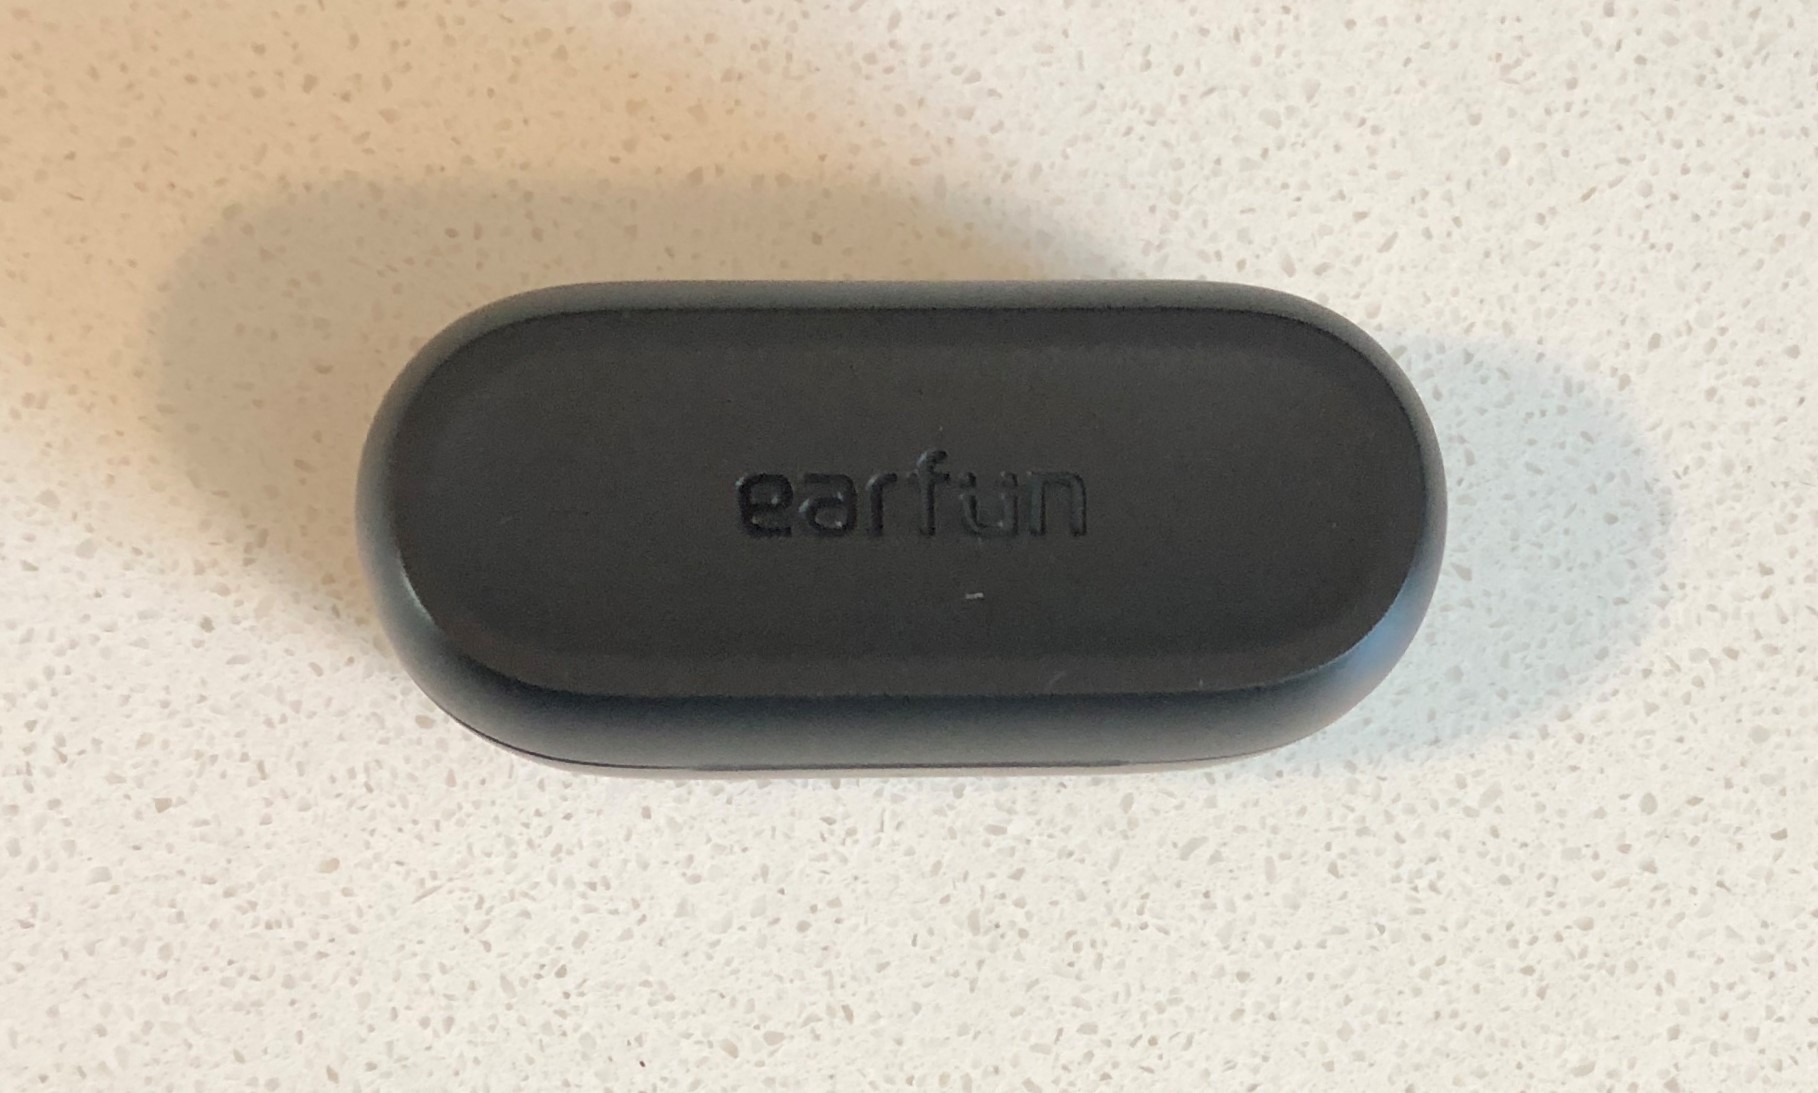 EarFun Free 2S charging and carrying case top